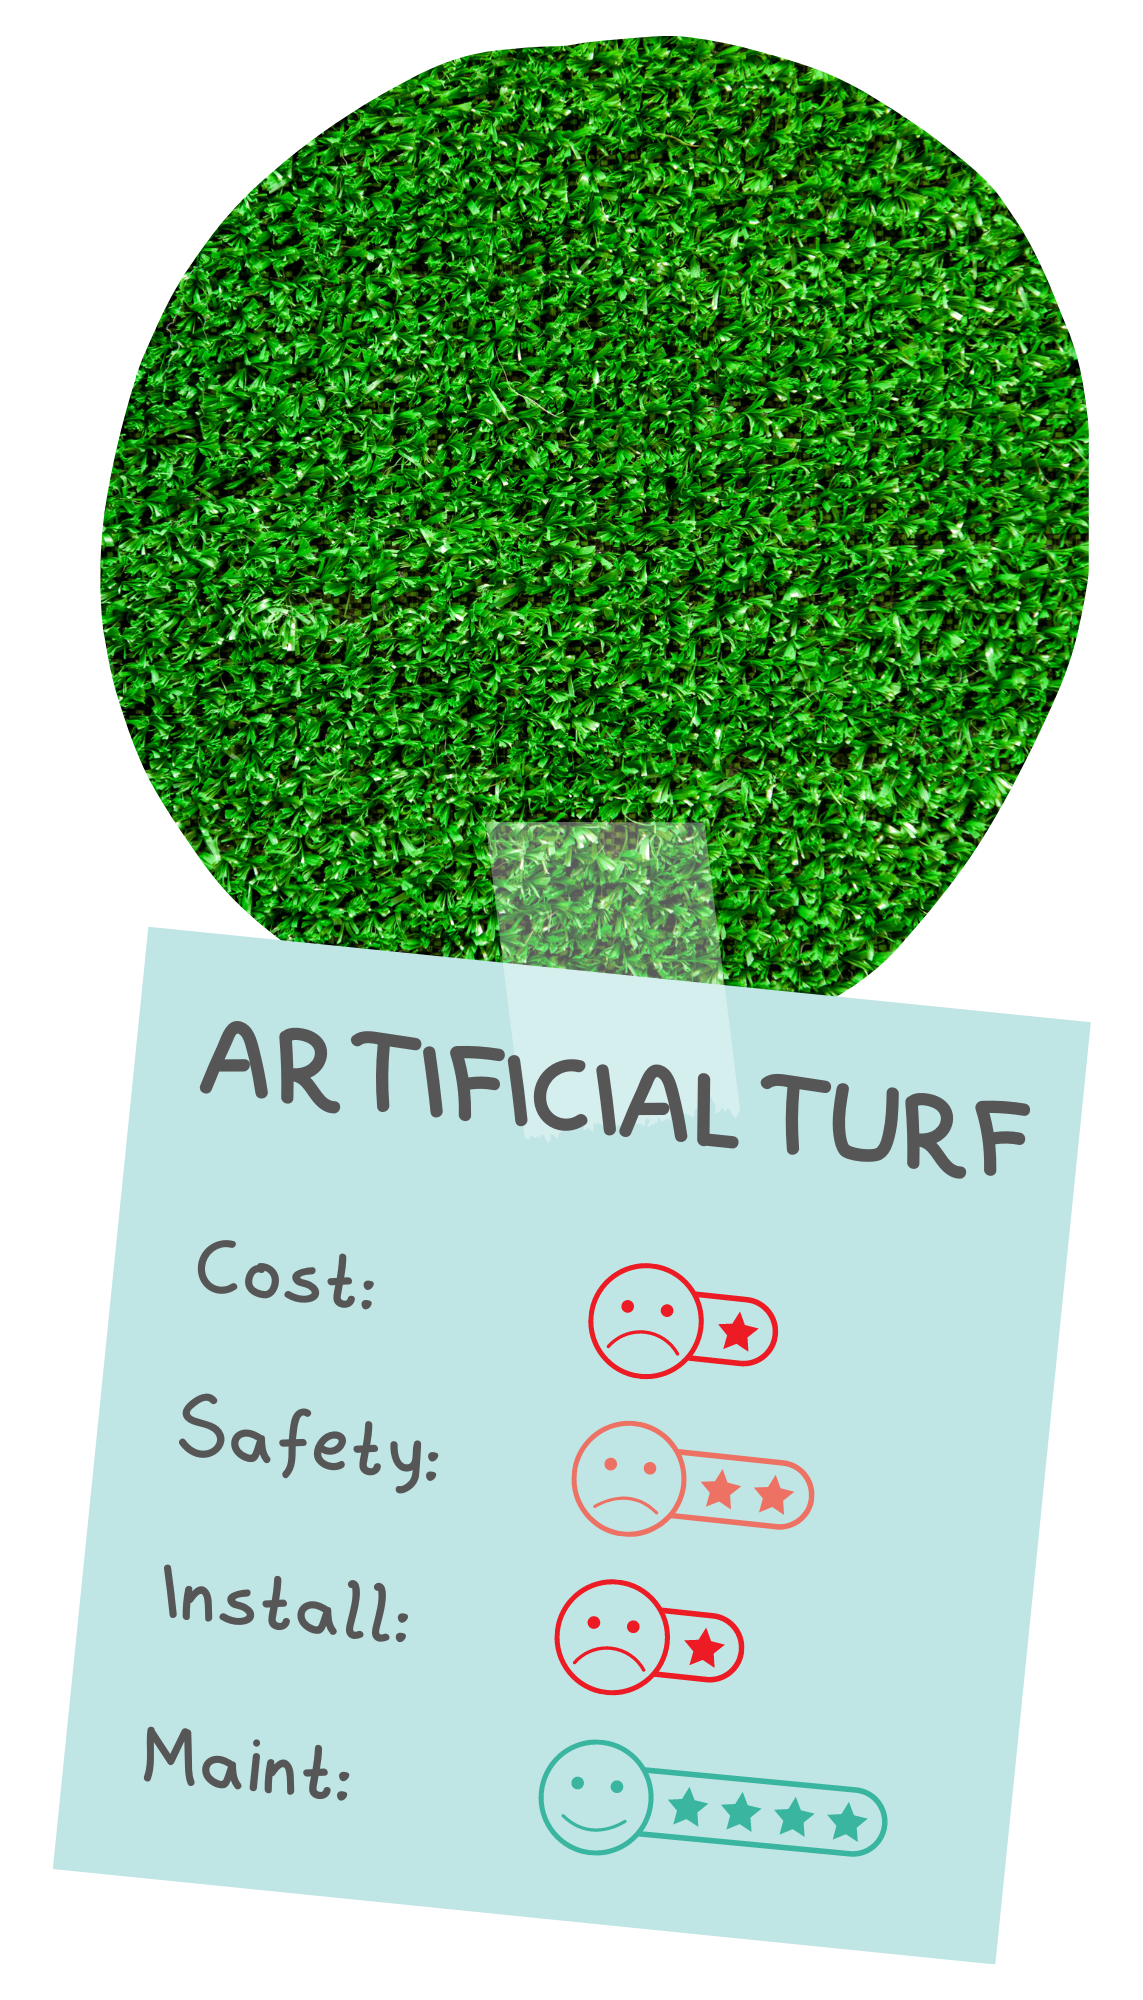 Artificial turf is rated by four categories. It receives 1 star for cost, 2 stars for safety, star for installation, and 4 stars for maintenance.